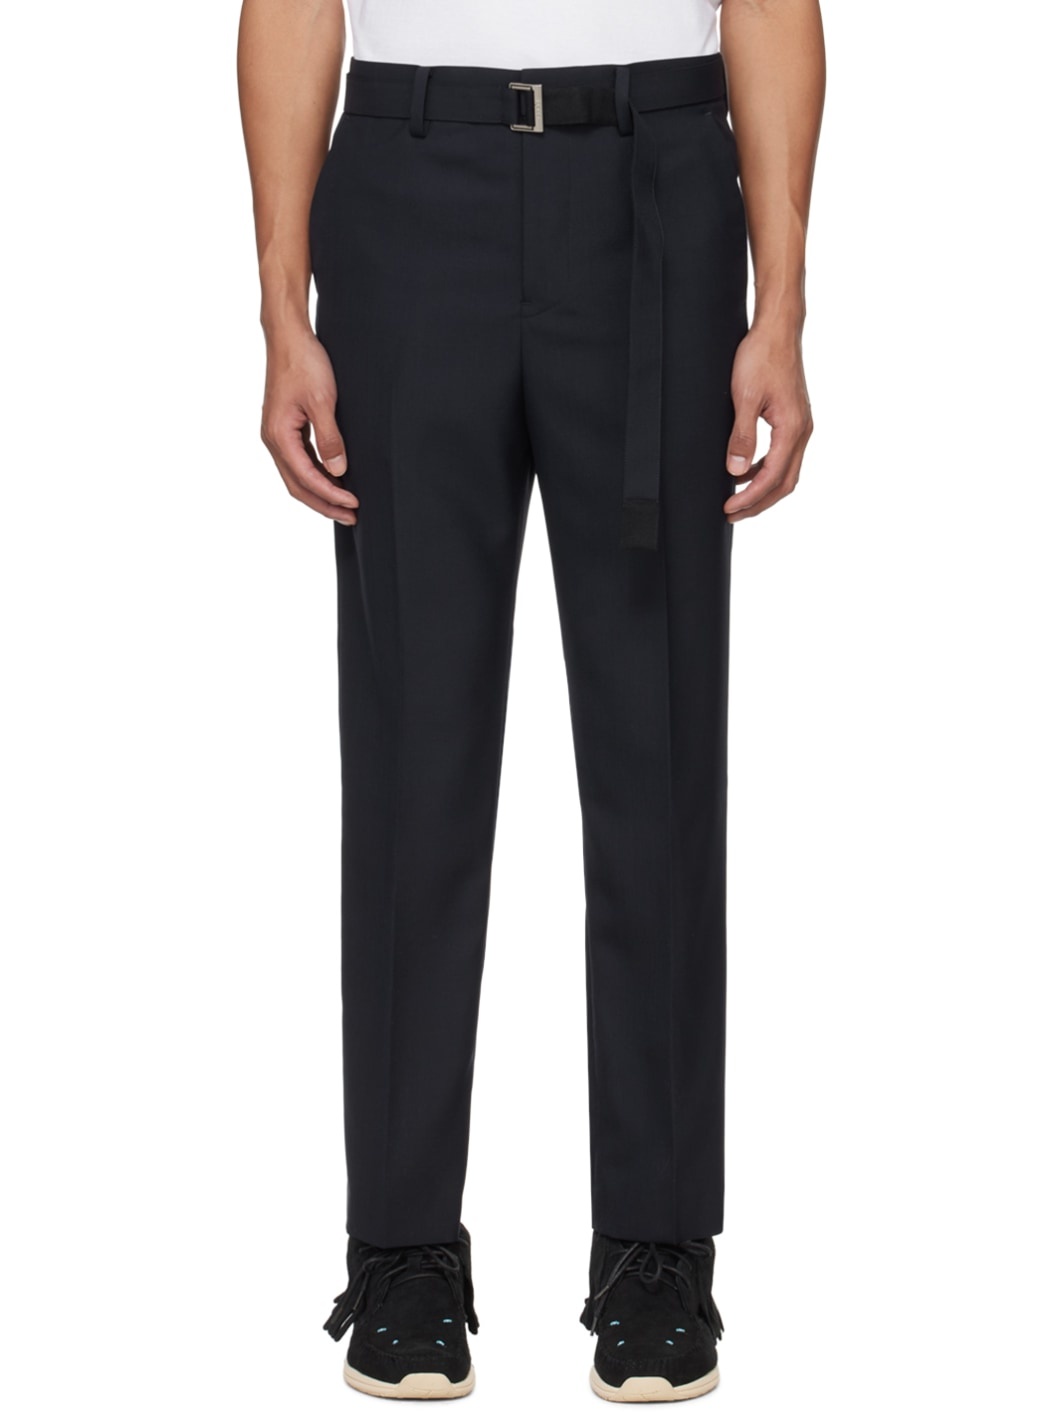 Navy Suiting Bonding Trousers - 1